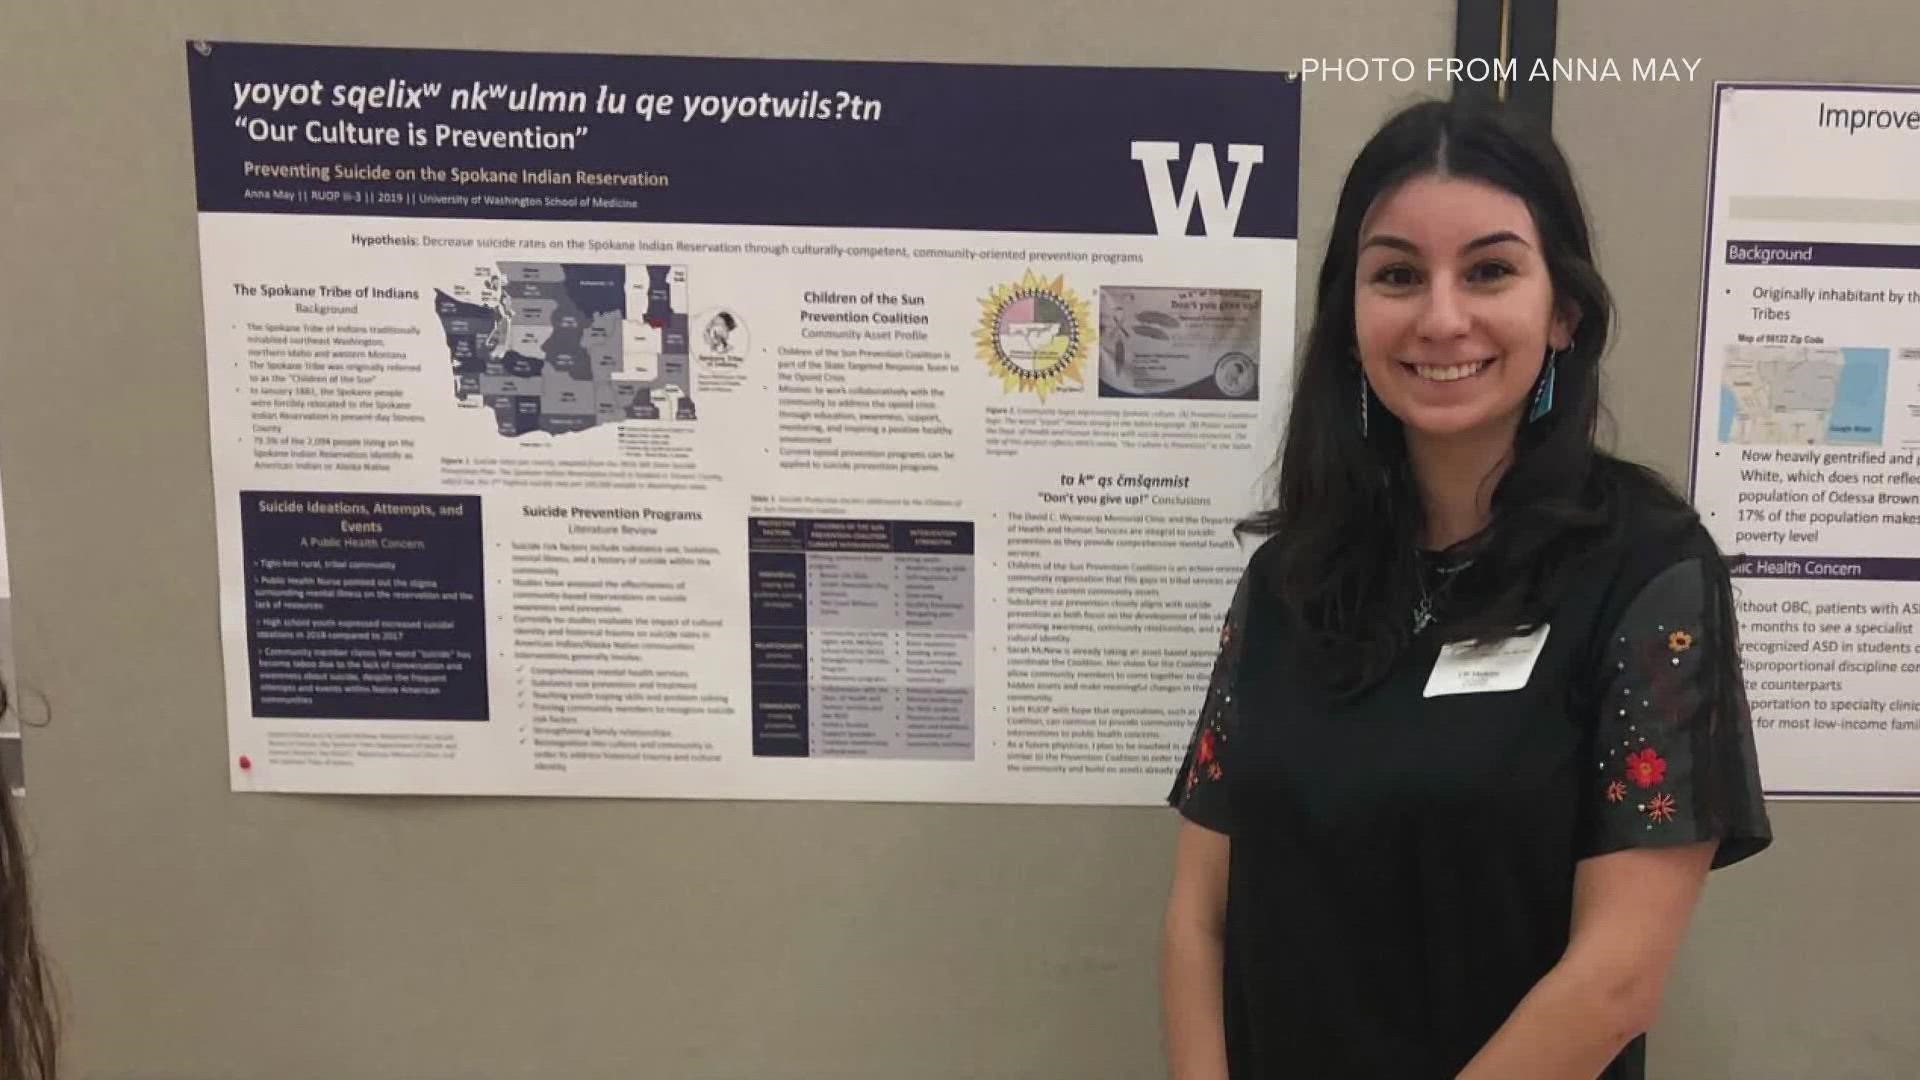 UW Medicine says it is hiring 12 more providers amid high demand. Some students training in the state are deciding to stay and fill open positions.